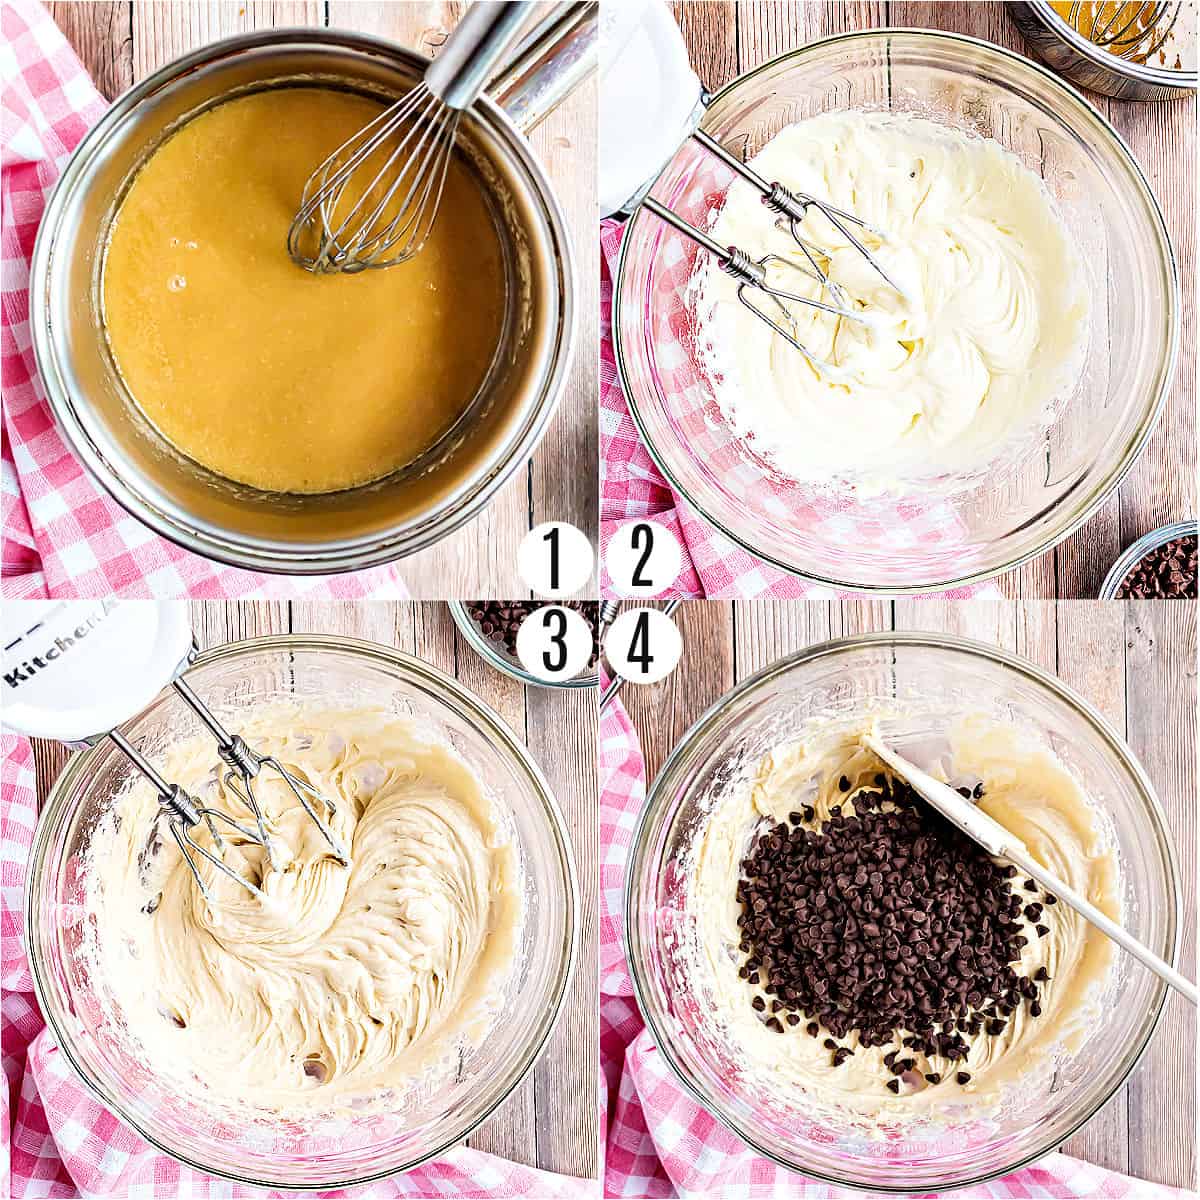 Step by step photos showing how to make cookie dough dip.